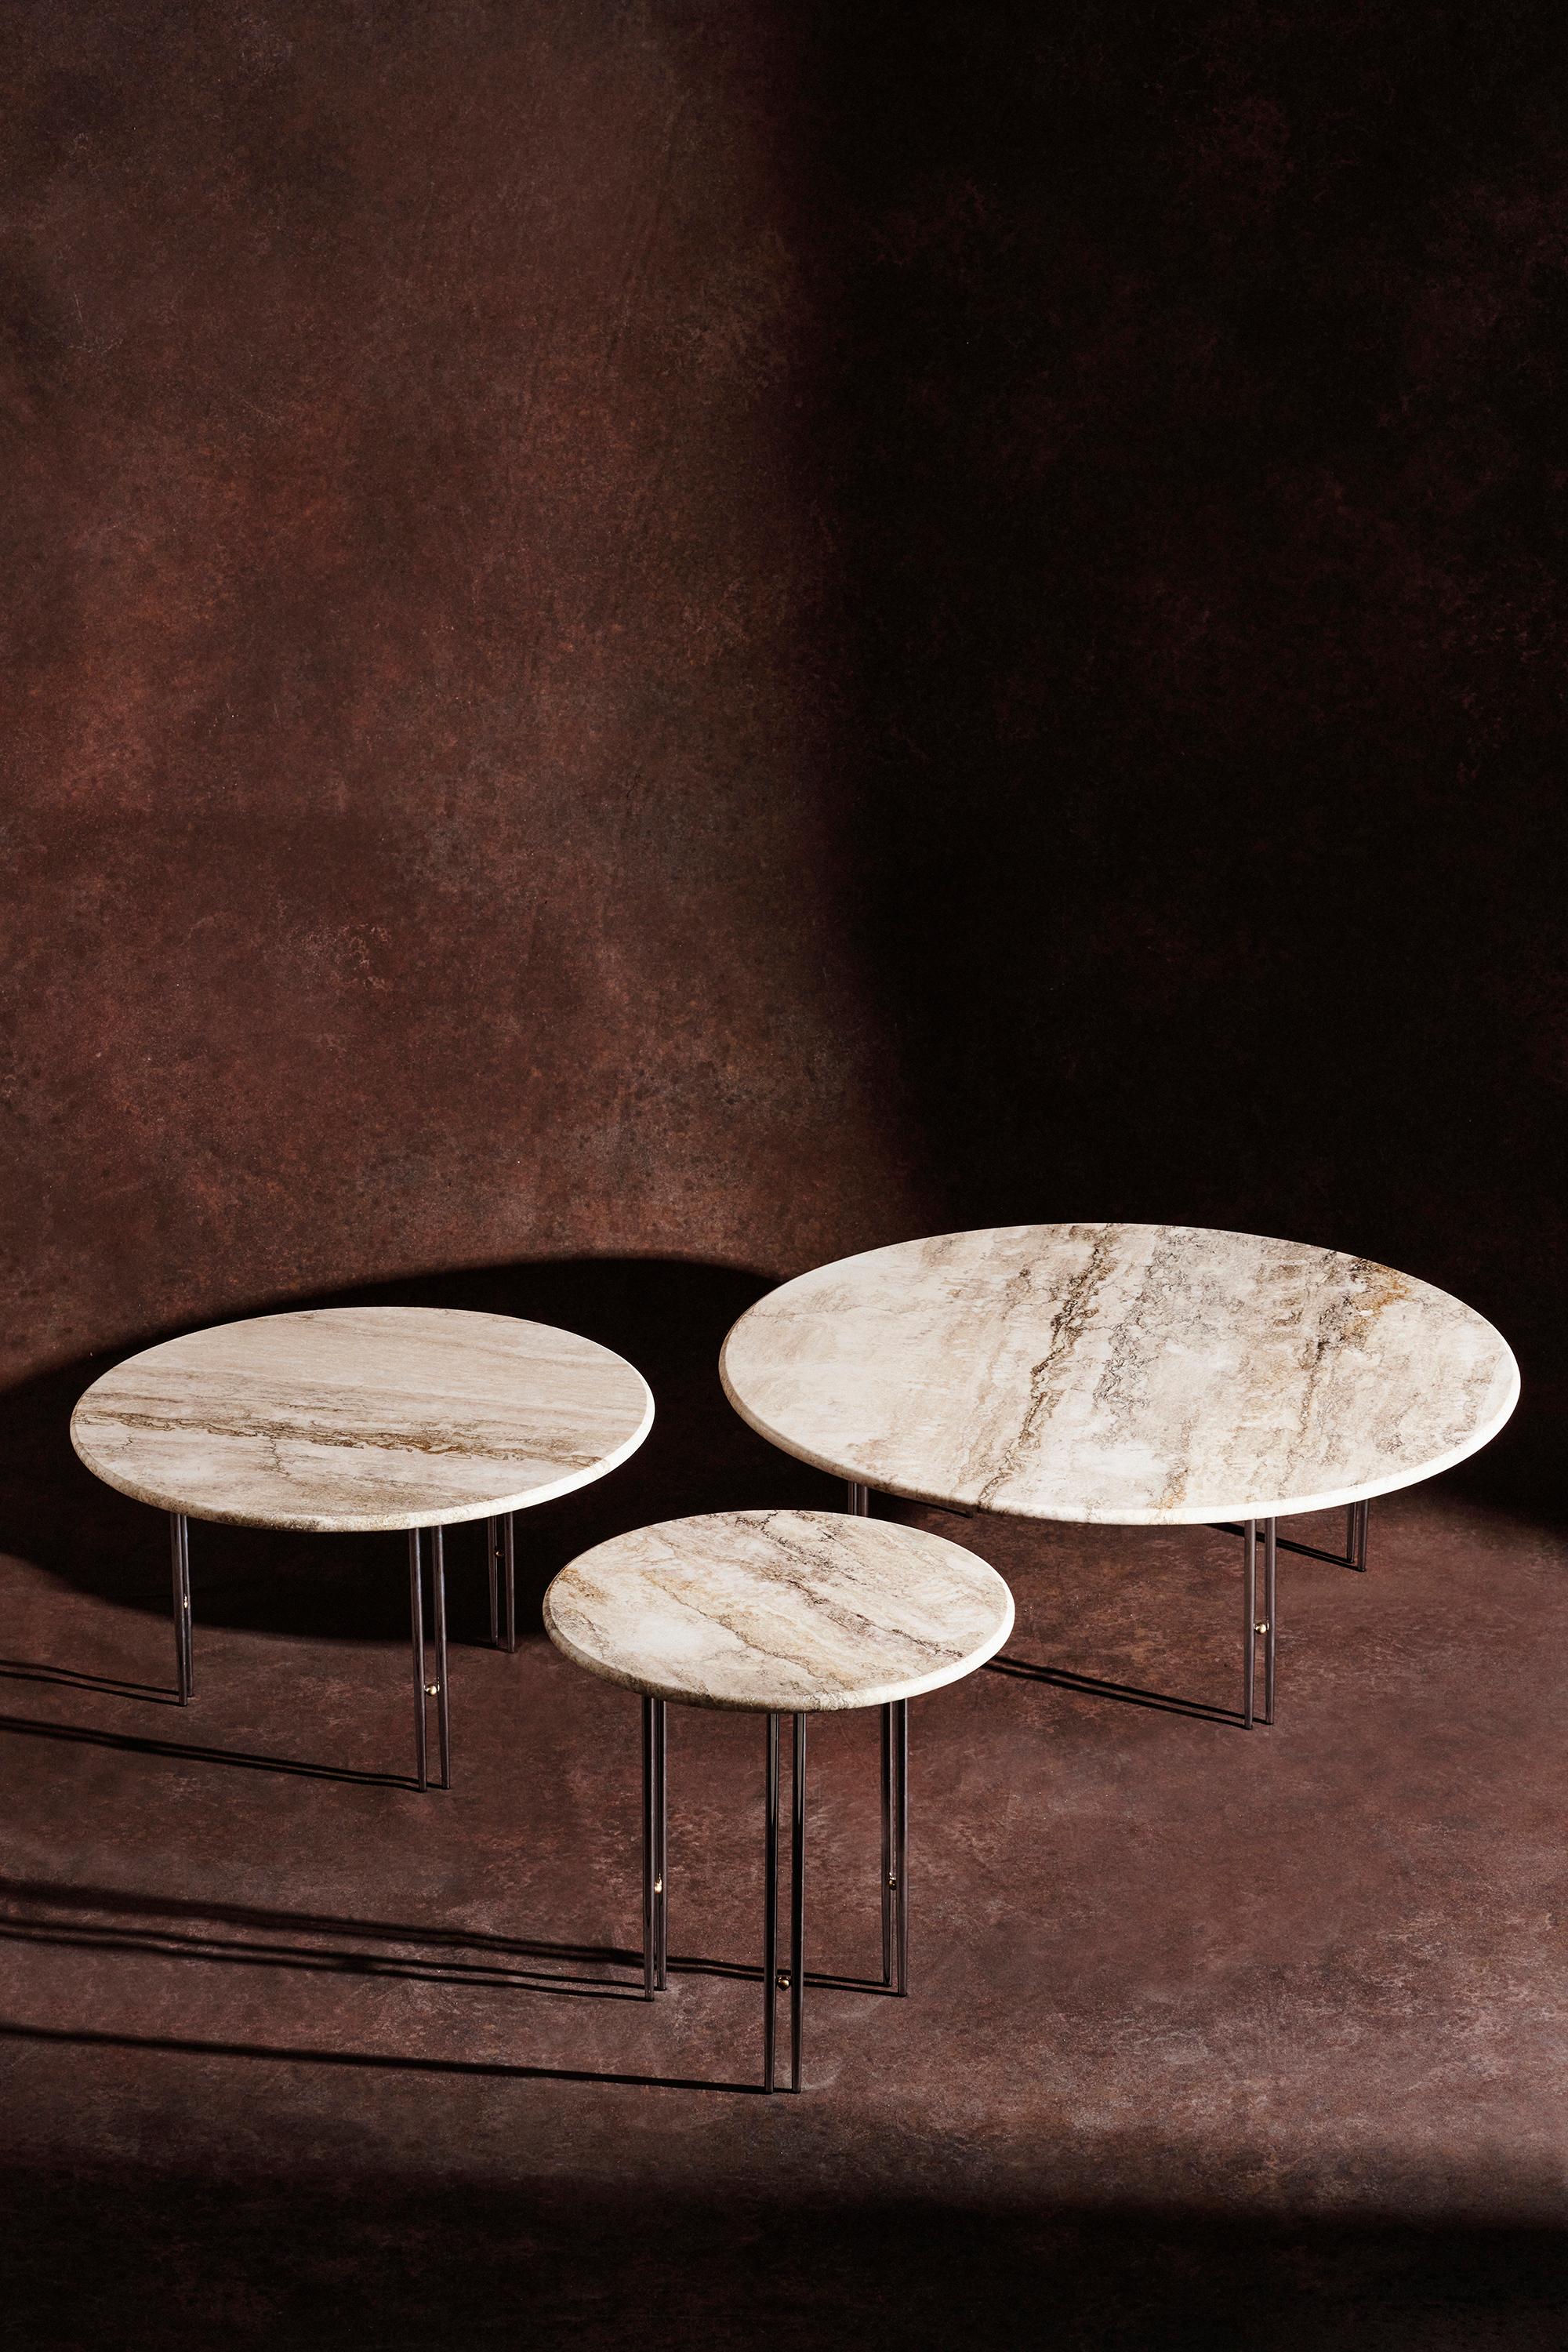 Large ‘IOI’ Travertine Coffee Table by GamFratesi for GUBI

A modern-day homage to the elegant geometry of Art Deco design, GamFratesi’s IOI Collection showcases the studio’s dedication to honest materiality and fascination with the interplay of